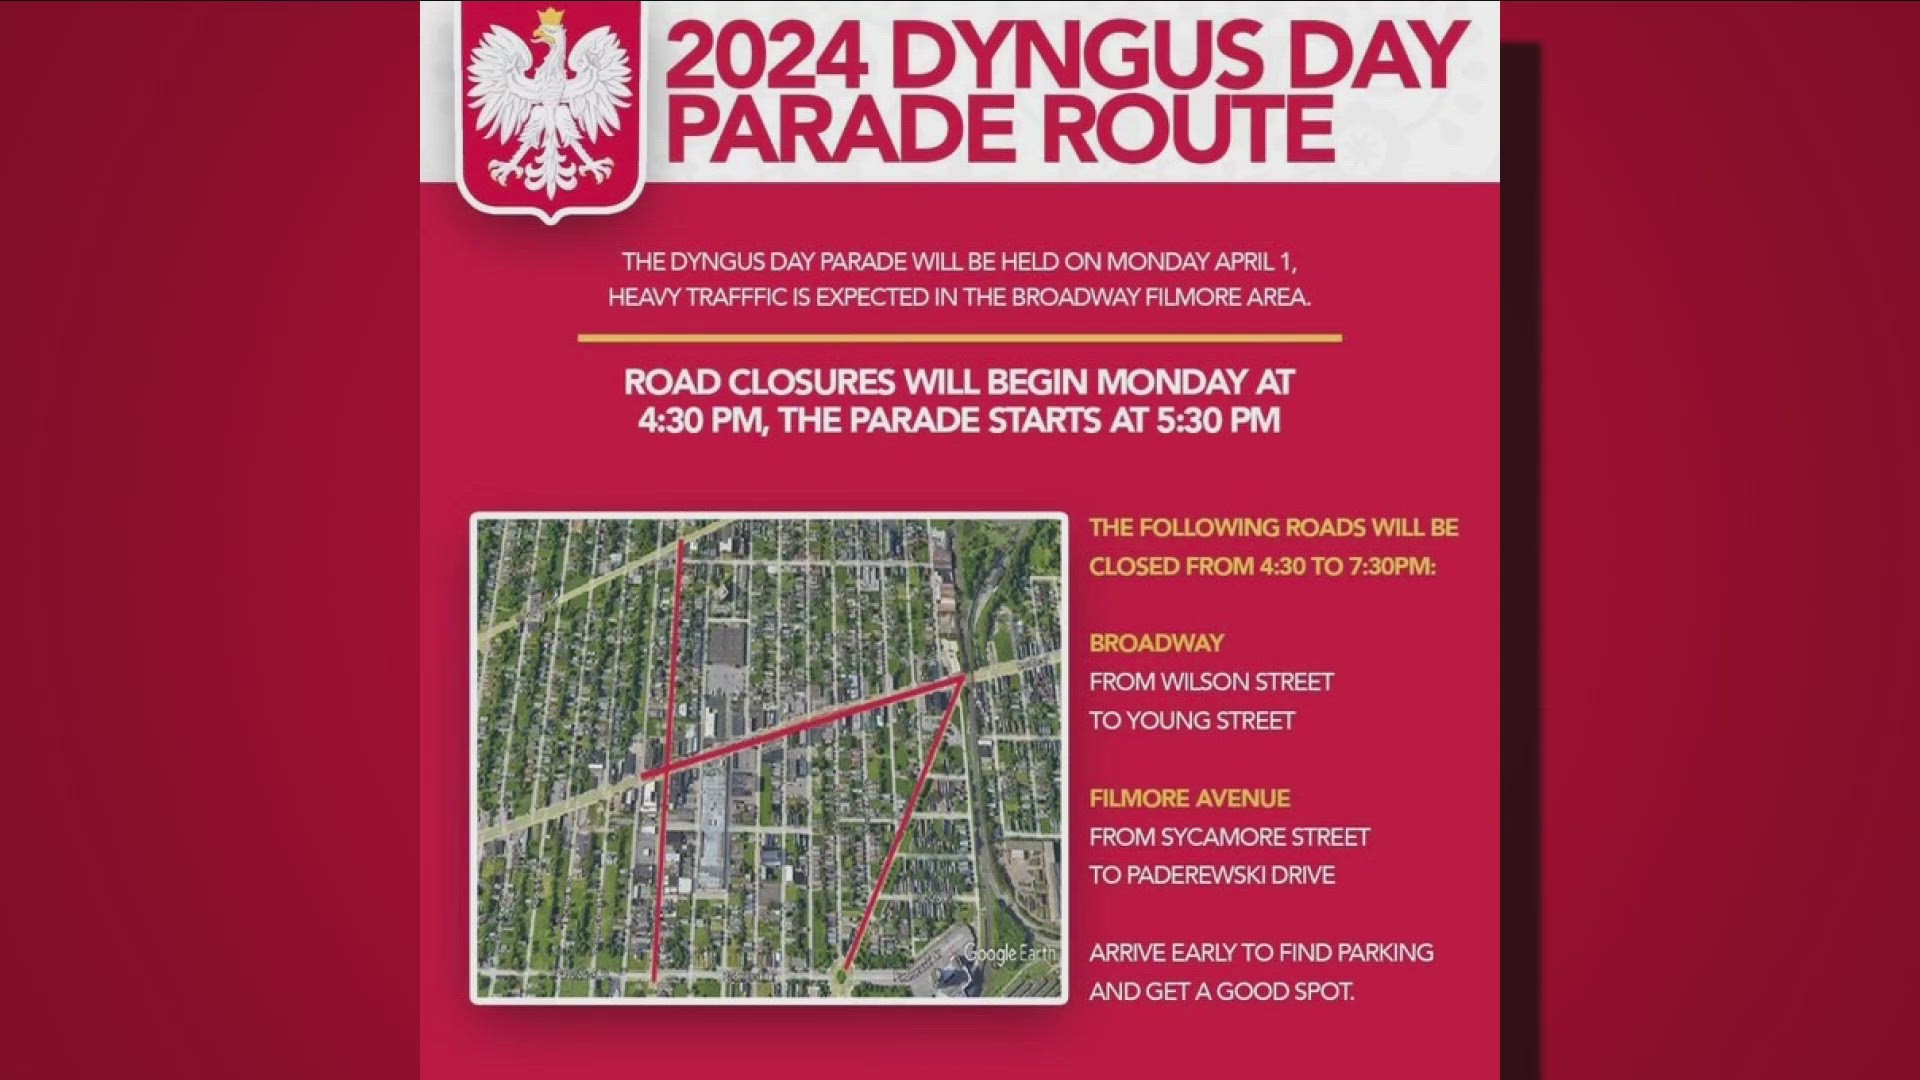 if you're going to the Dyngus Day parade, you should arrive early to find parking and get a good spot.